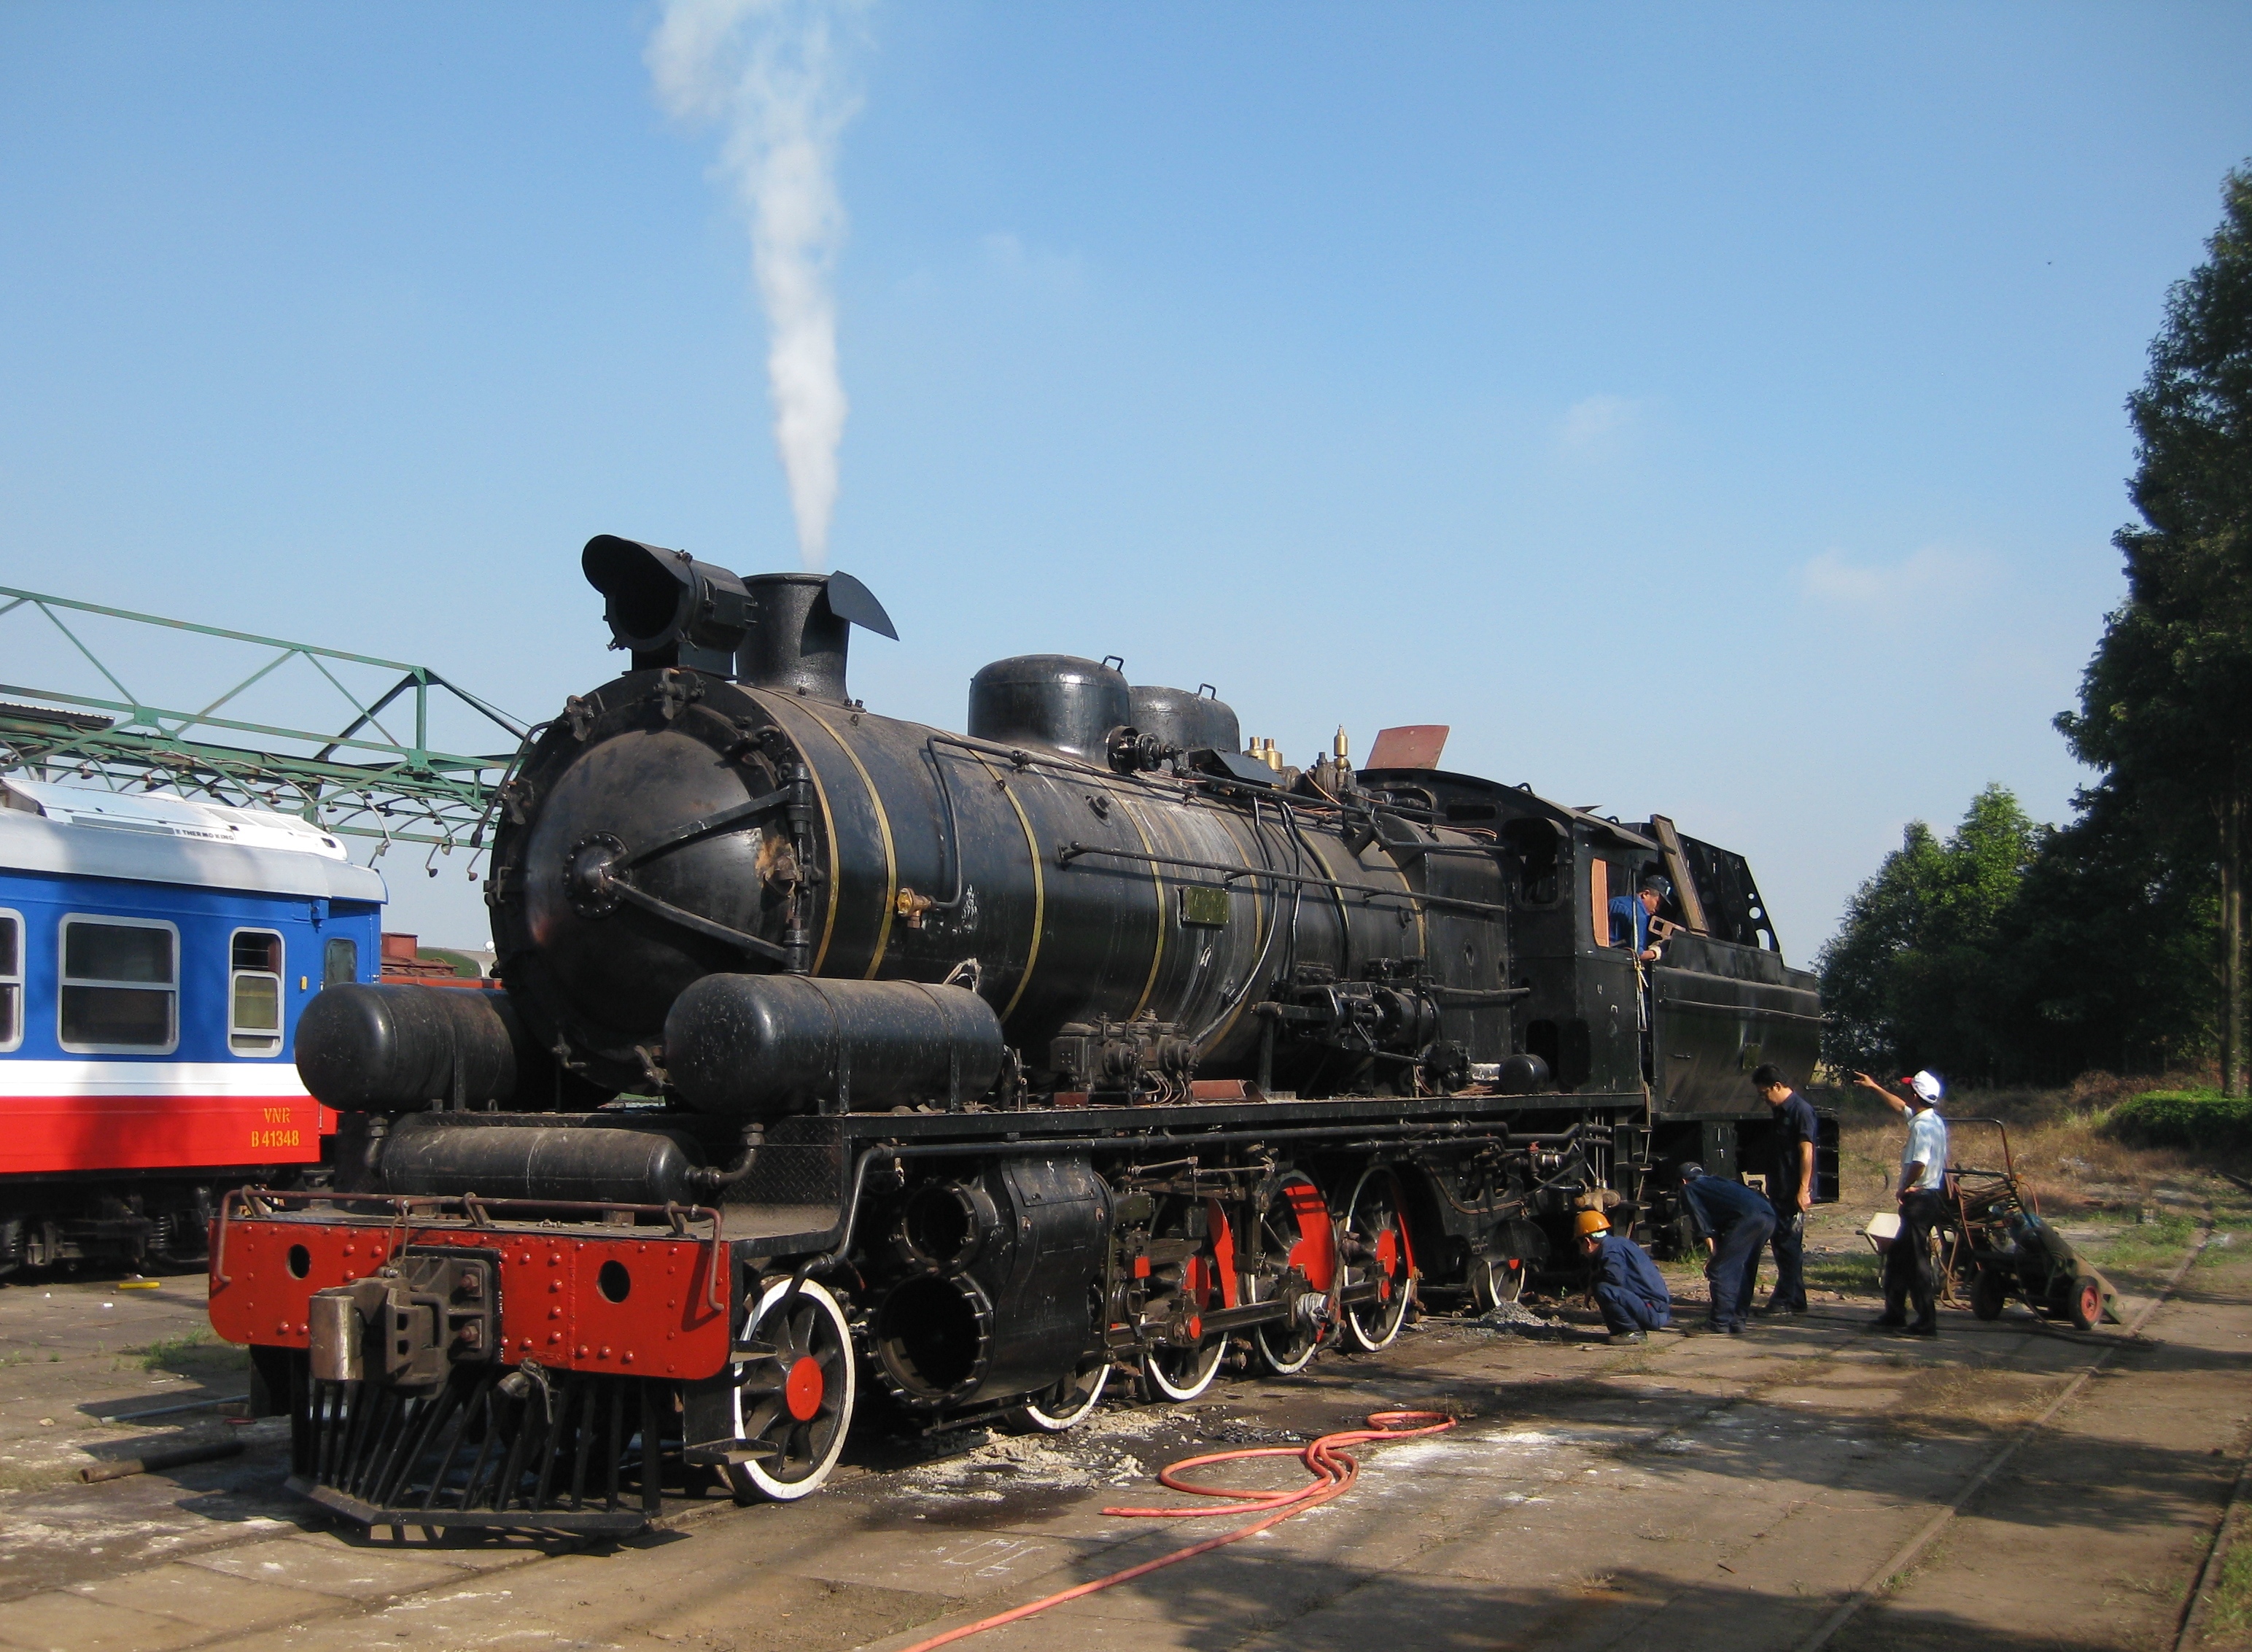 Vietnam’s first steam locomotive brought back to life